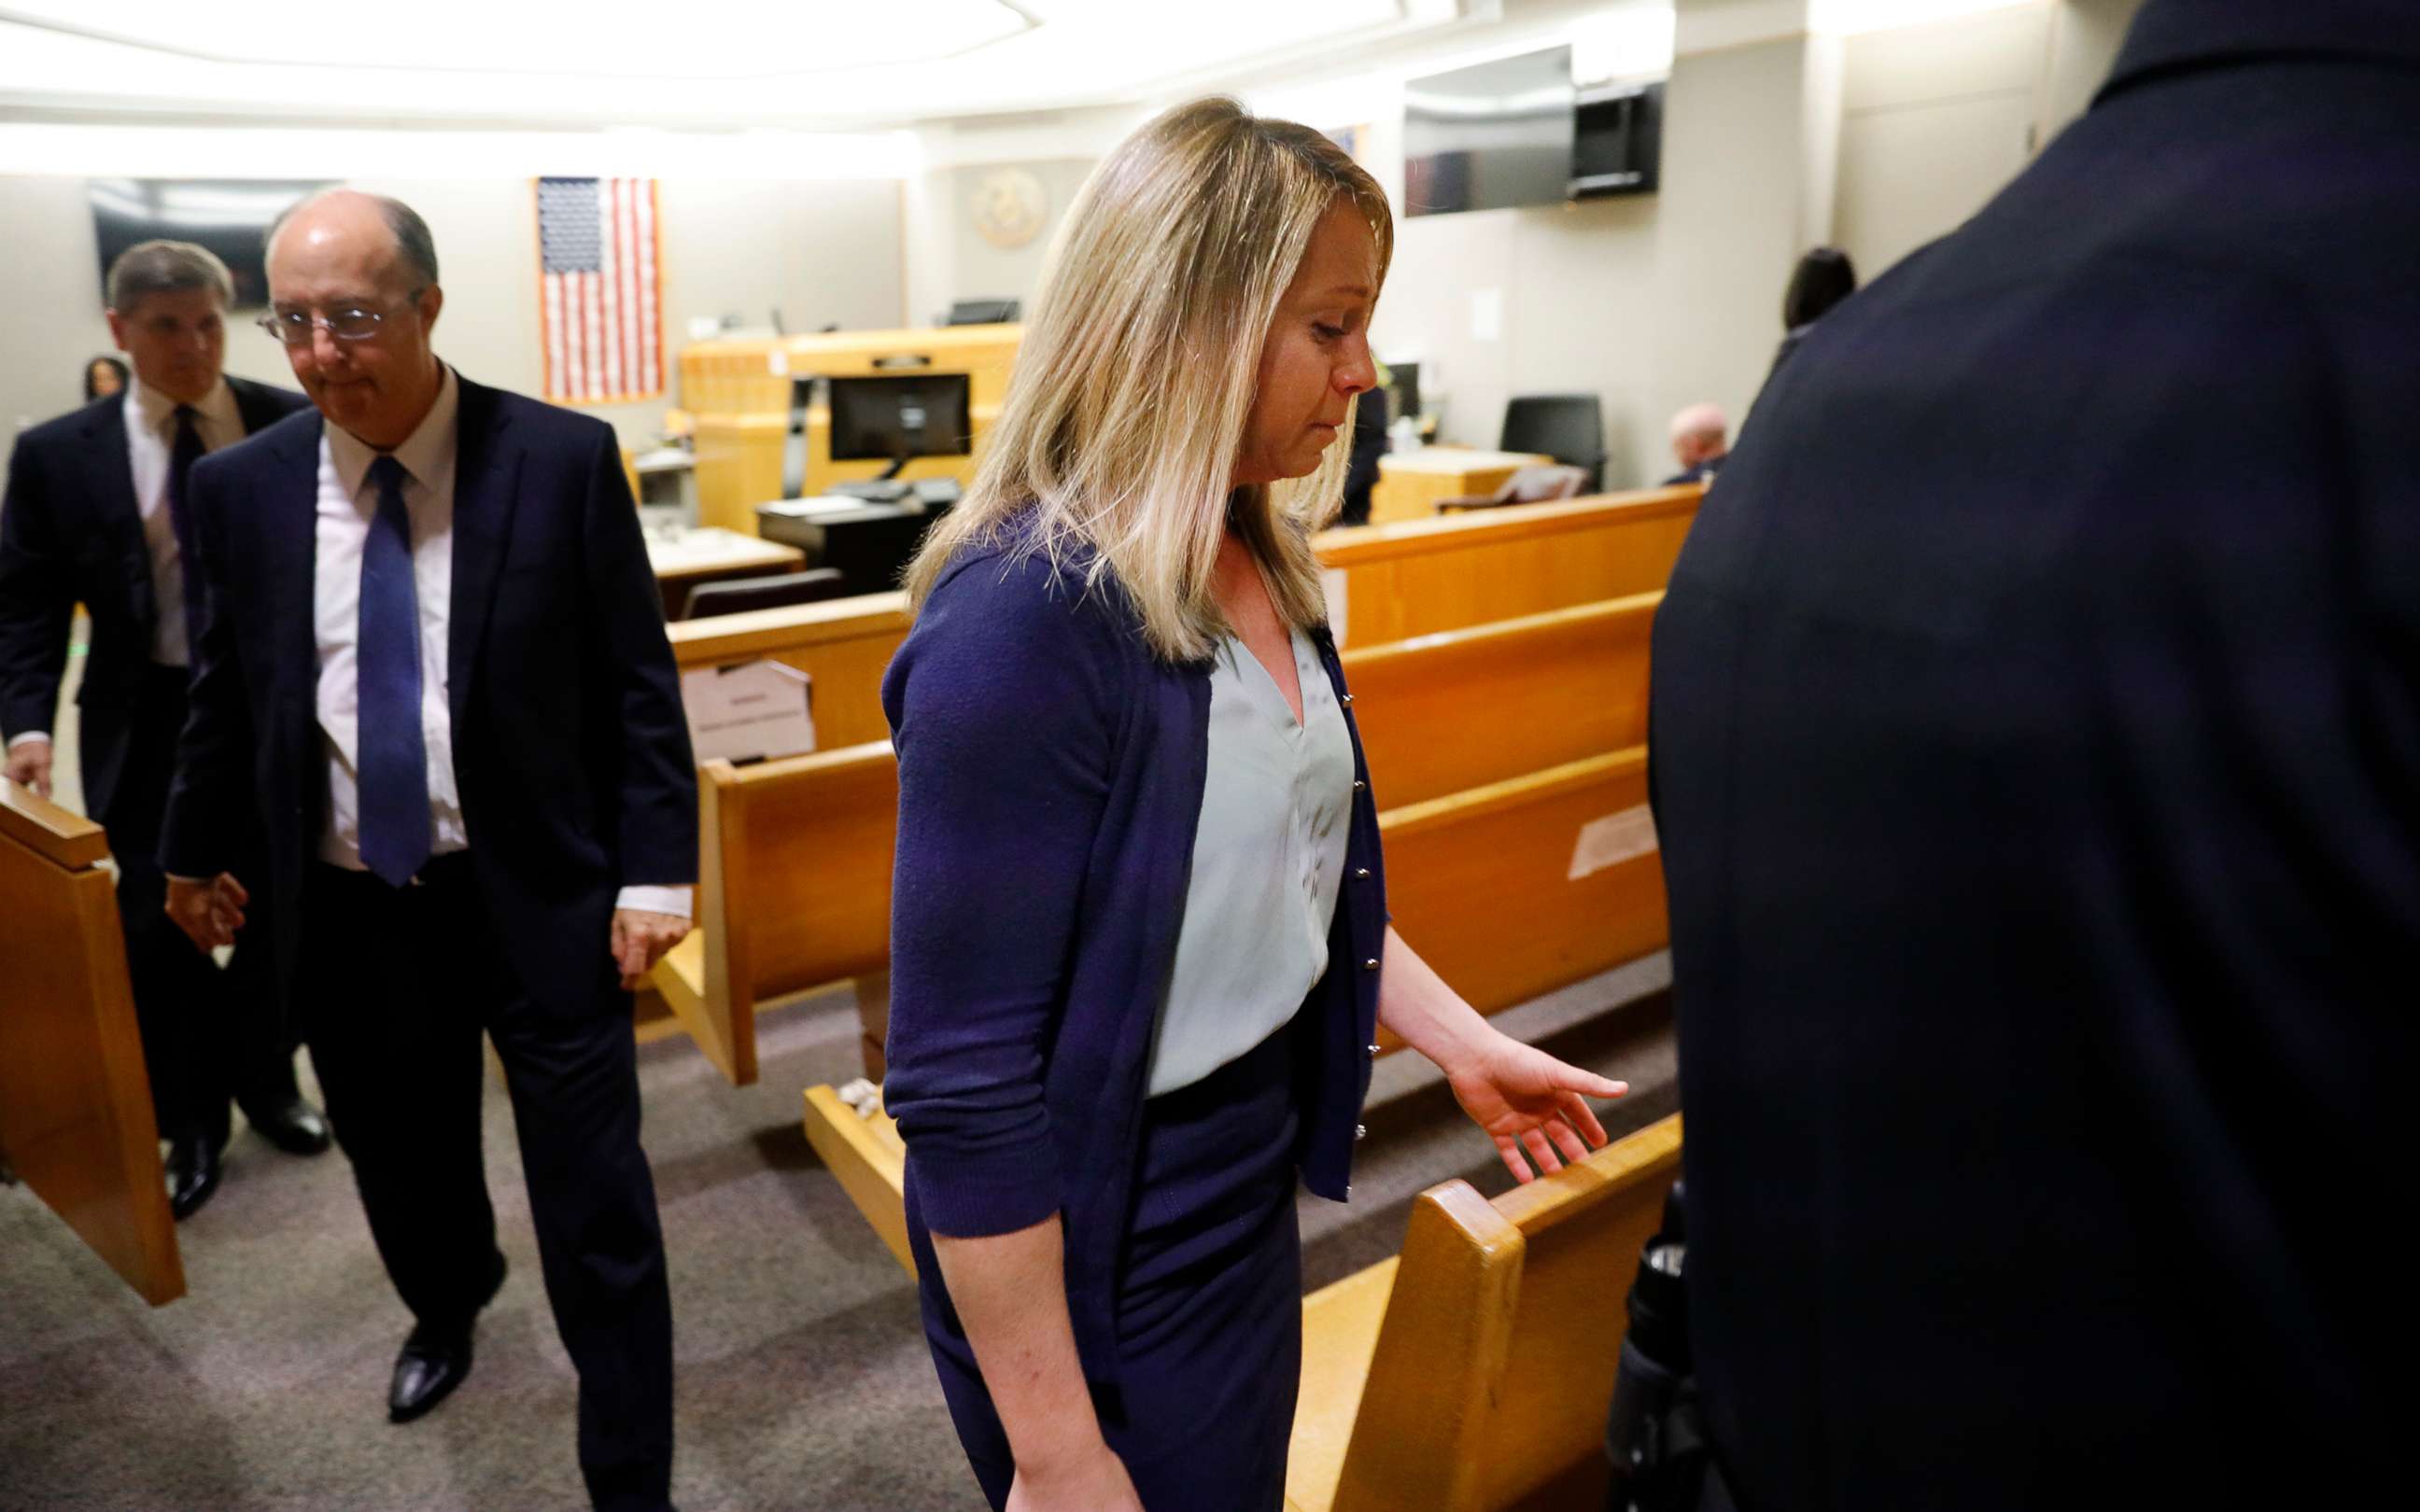 PHOTO: Fired Dallas police officer Amber Guyger leaves the courtroom after a jury found her guilty of murder, Oct. 1, 2019, in Dallas.